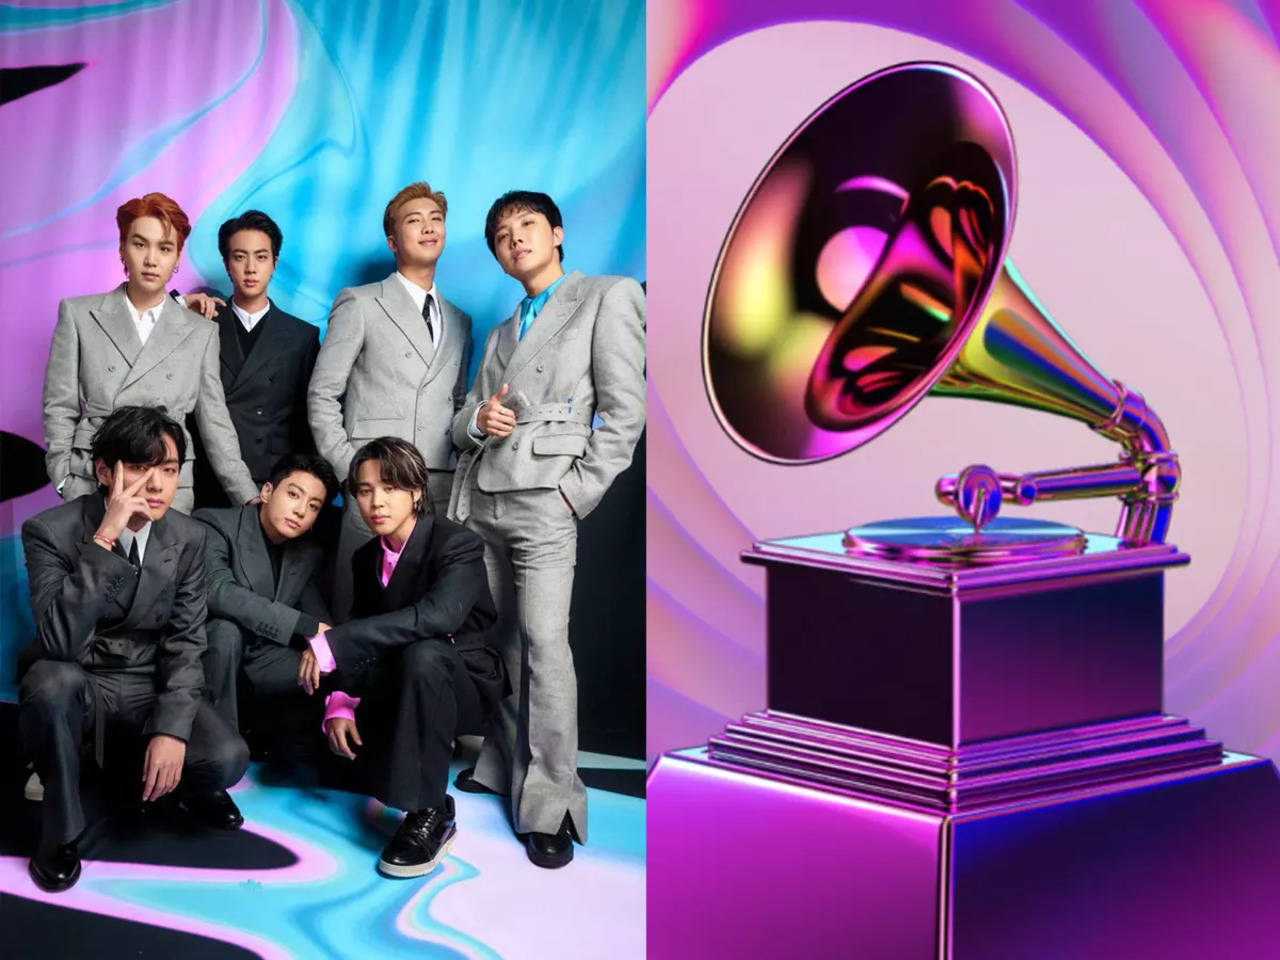 Is this BTS's year for a Grammy Award nomination?